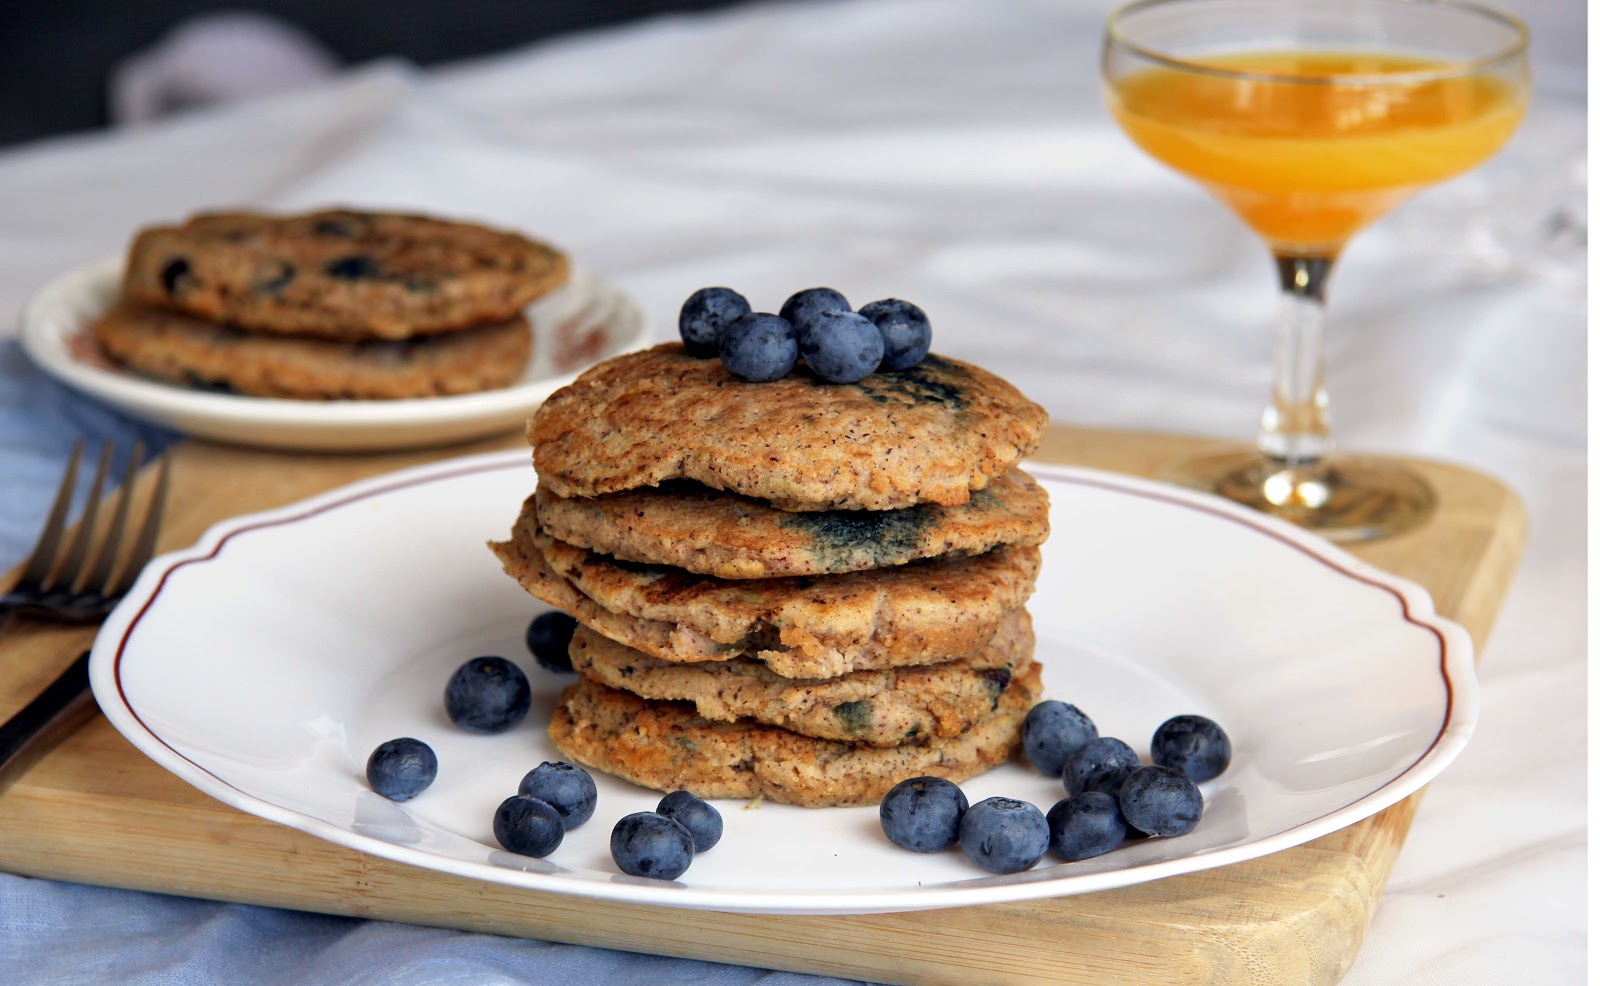 make else with what pancakes  it would oat to  food protein about blog how about? be flour